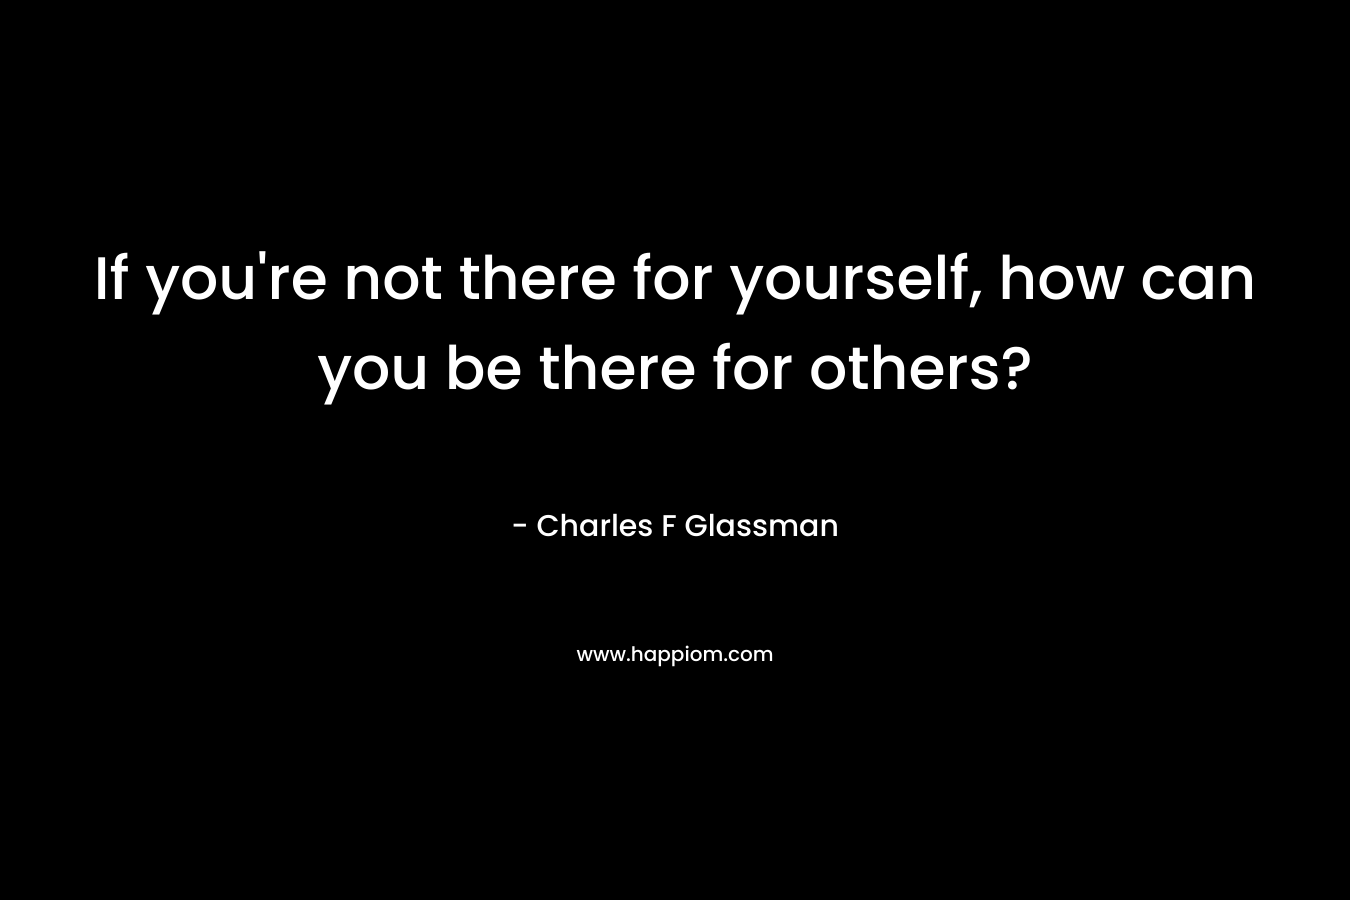 If you're not there for yourself, how can you be there for others?